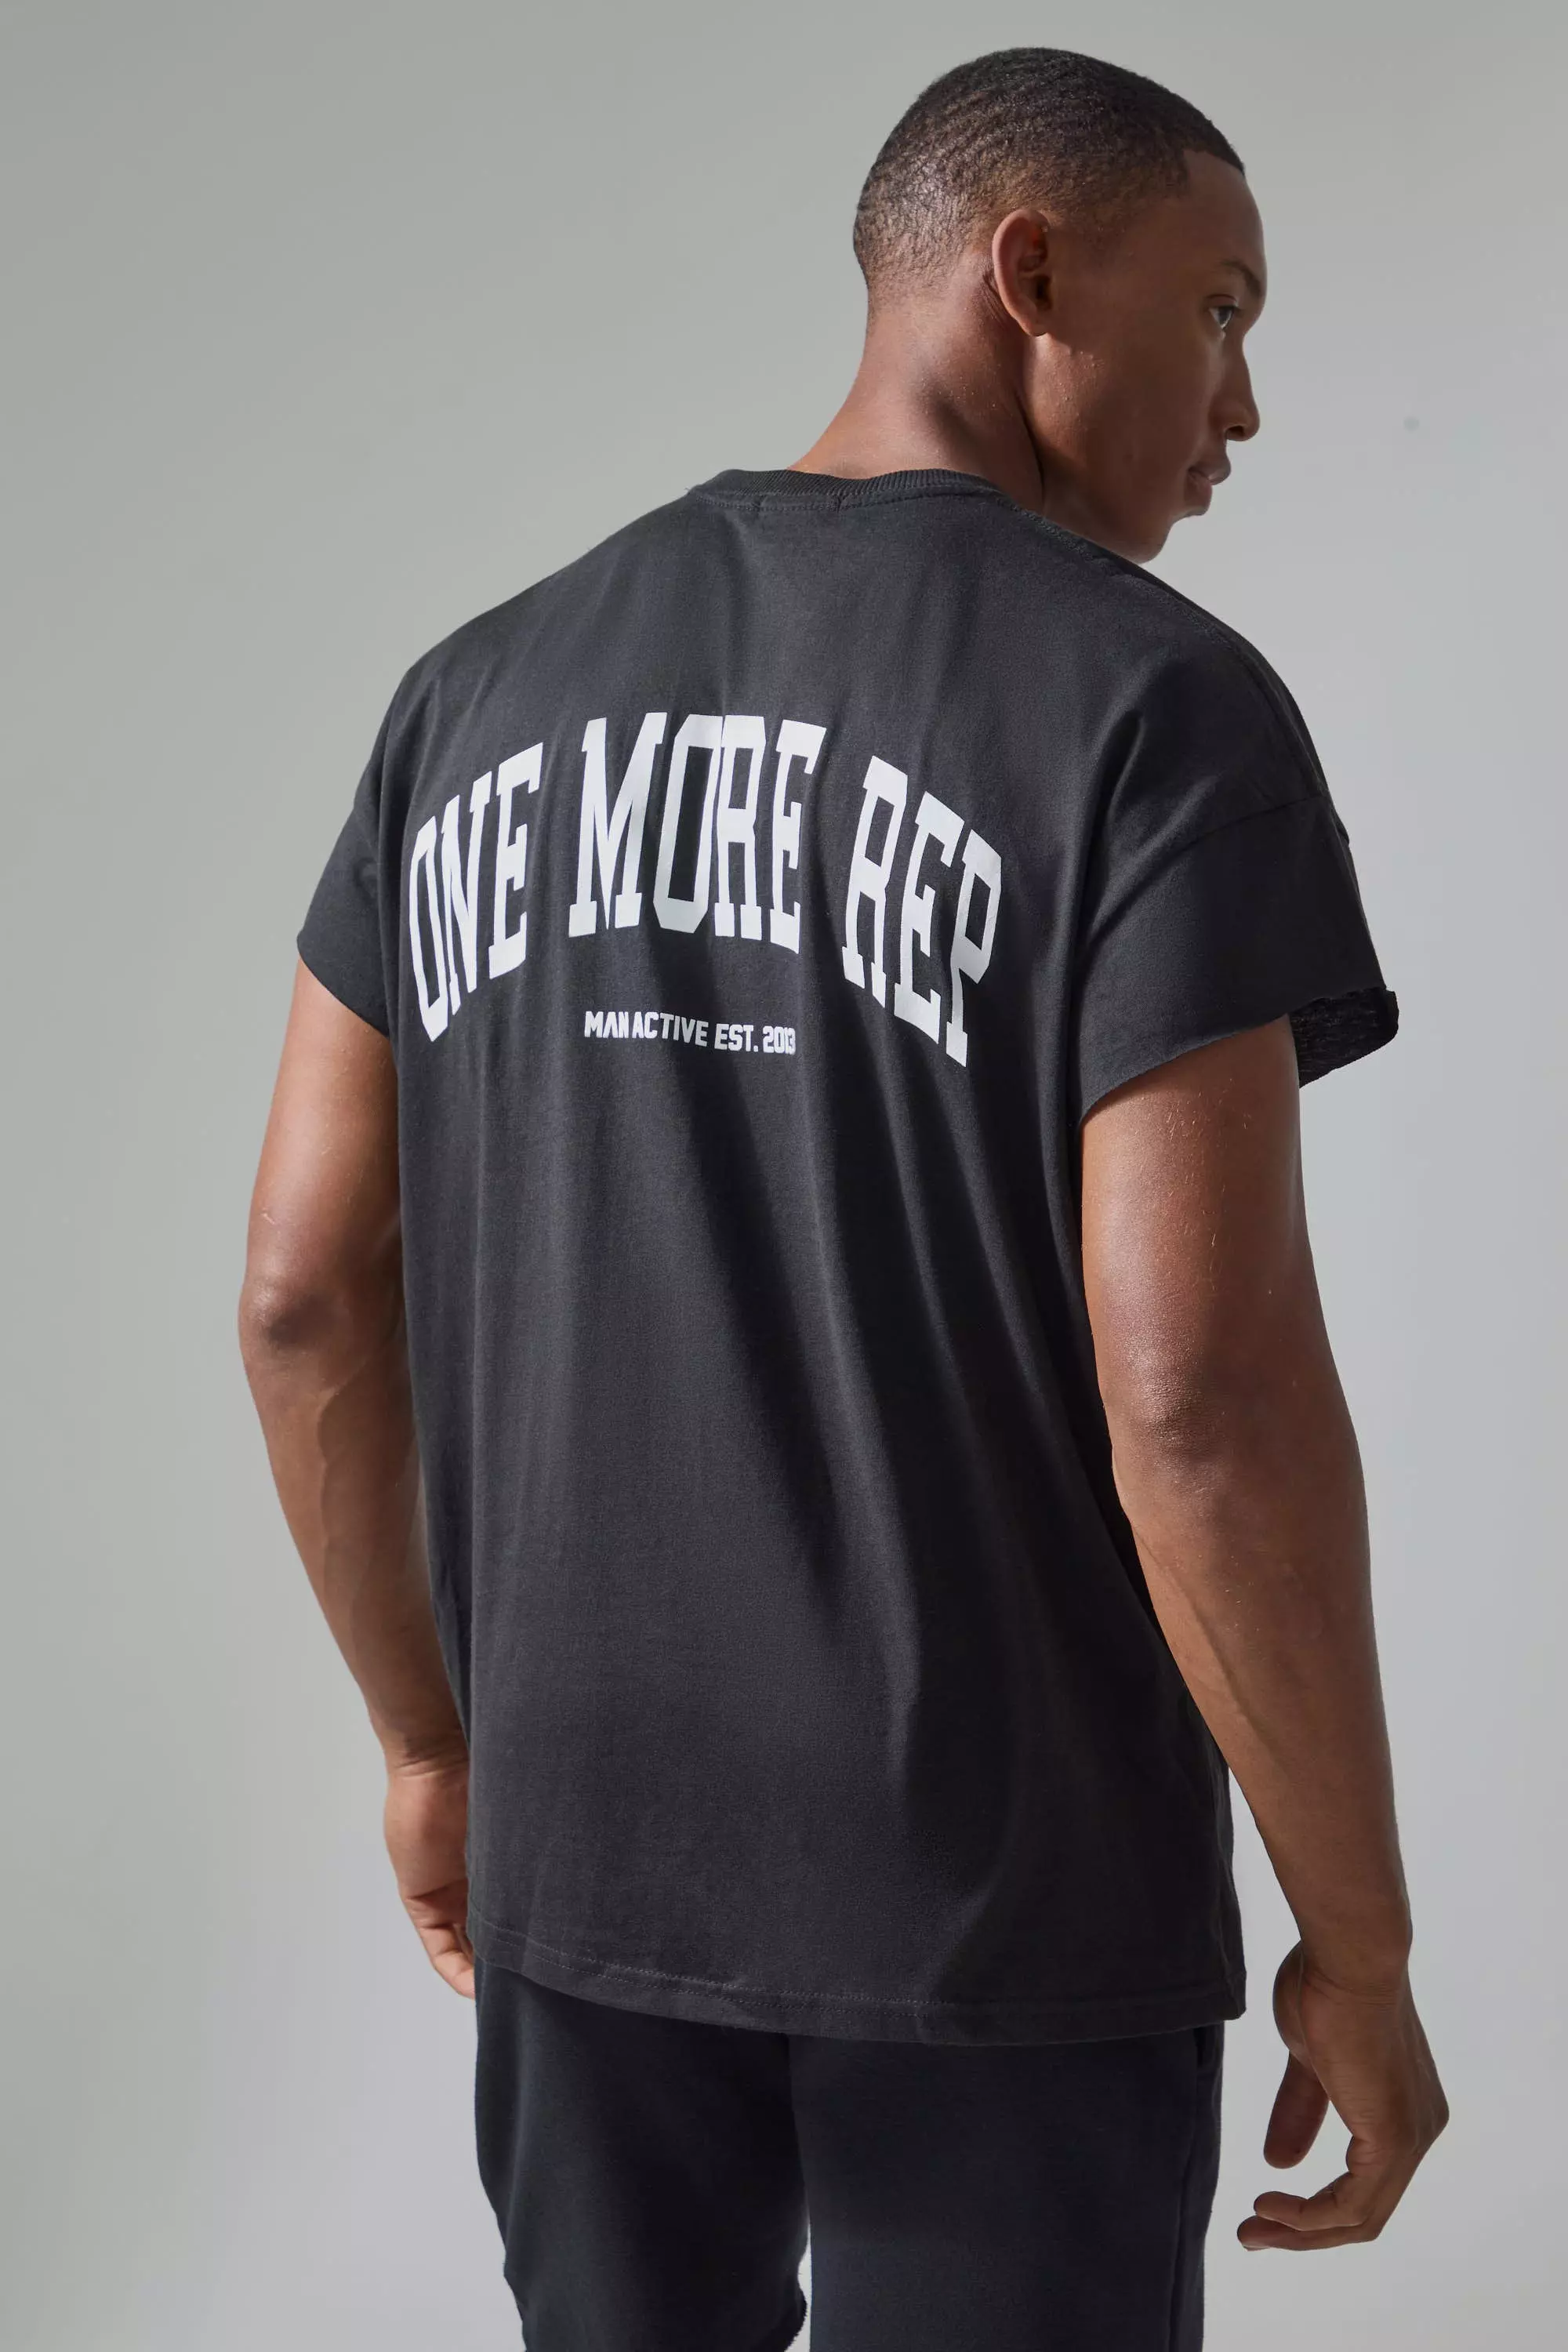 Man Active Oversized One More Rep Cut Off T-shirt Black